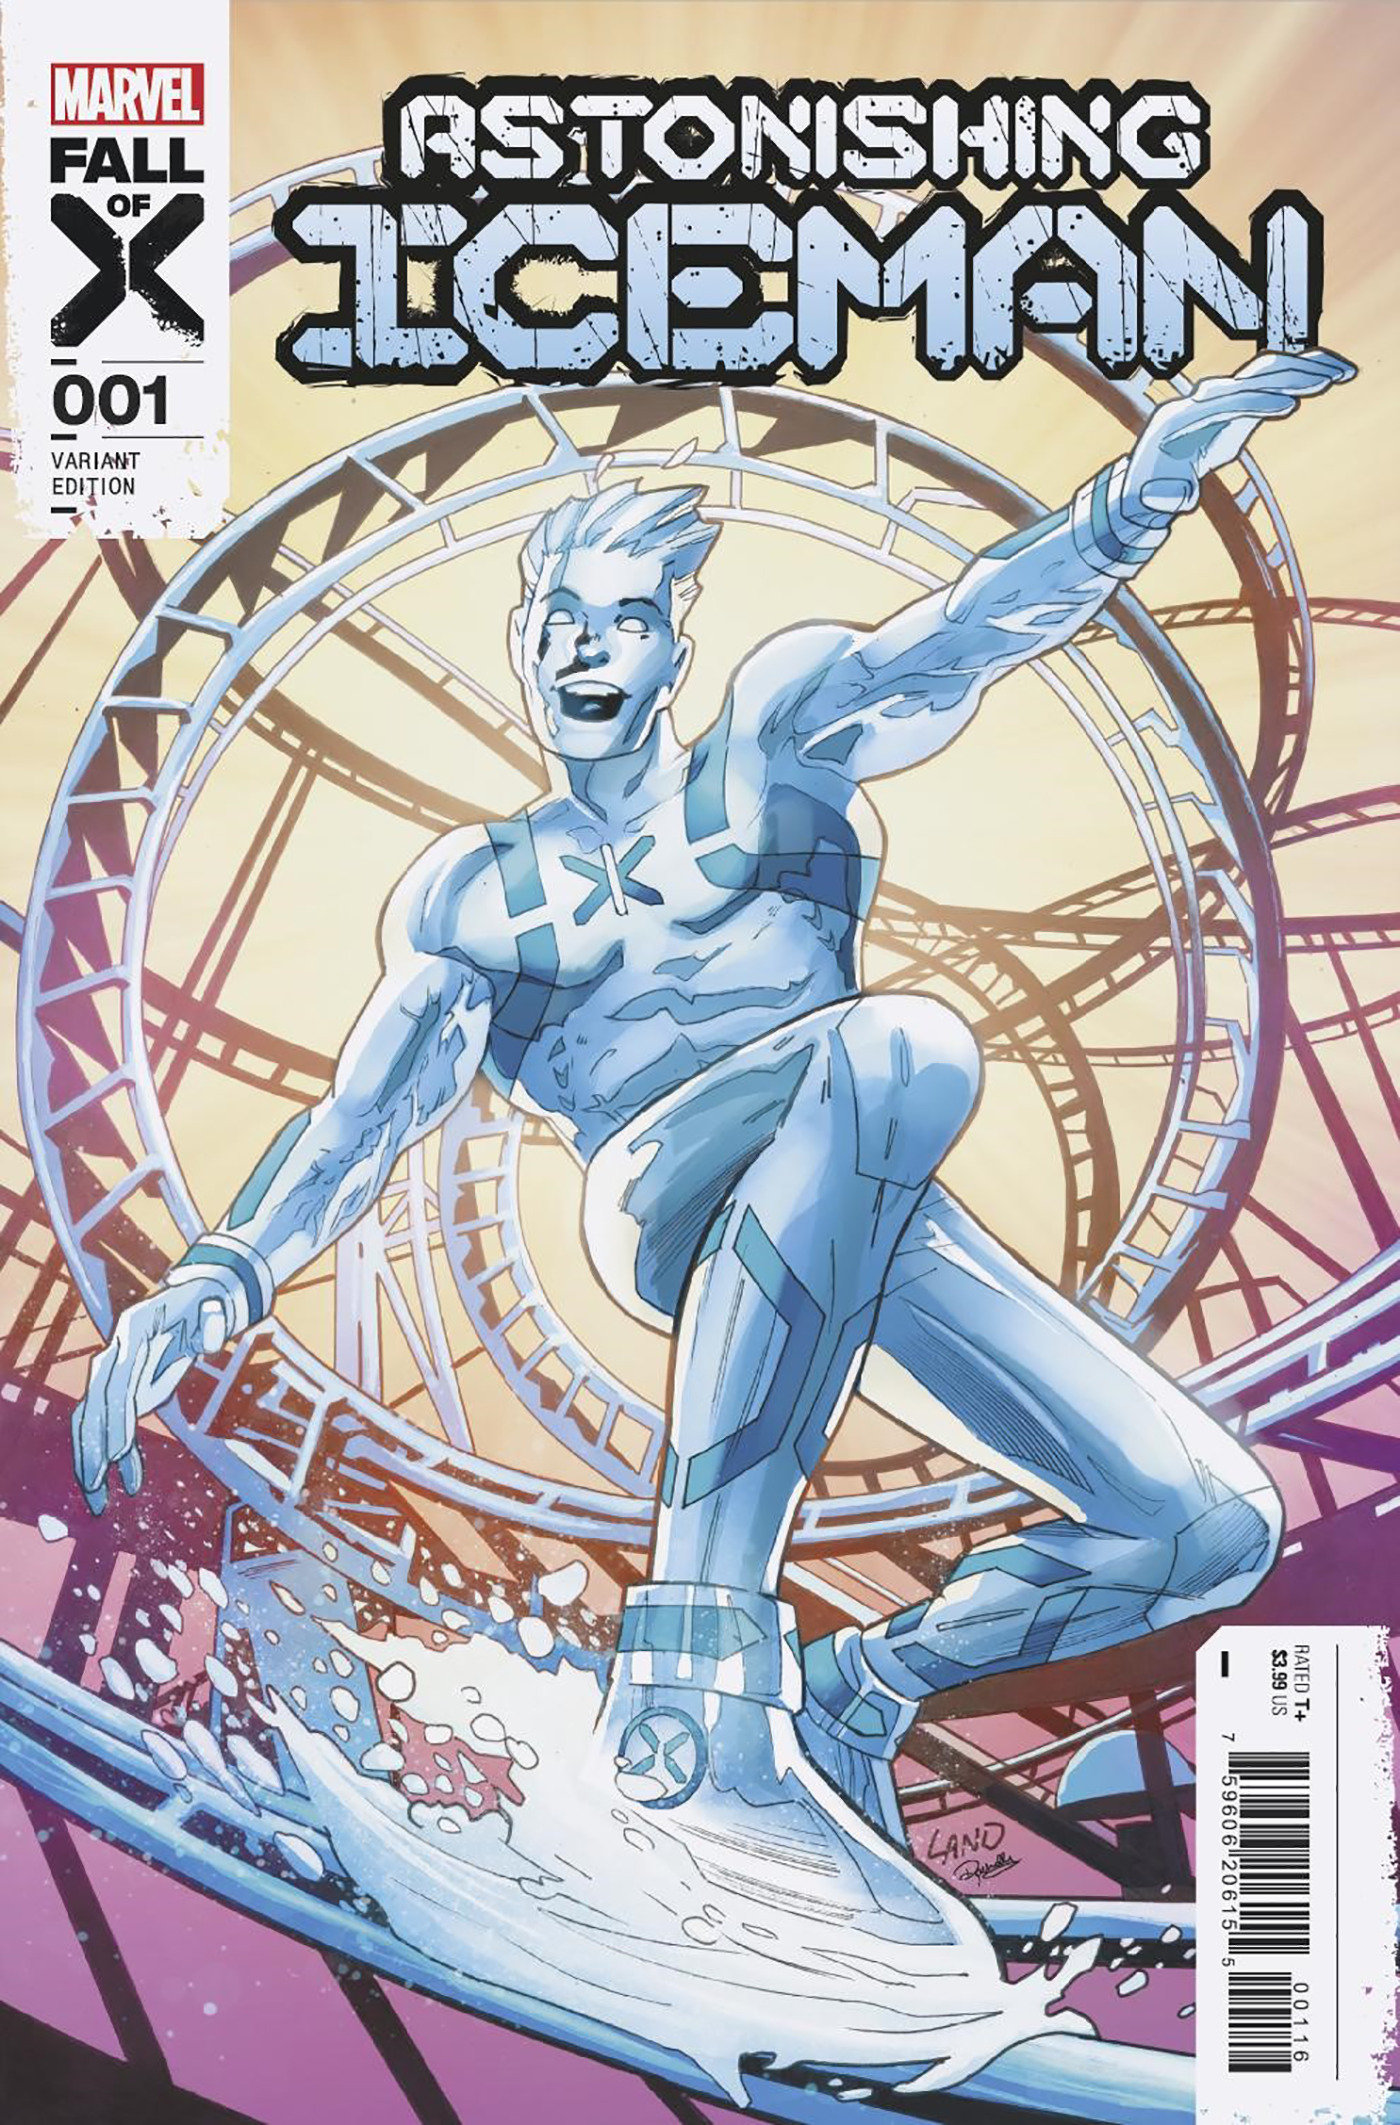 Astonishing Iceman #1 Greg Land 1 For 25 Incentive Variant (Fall of the X-Men)